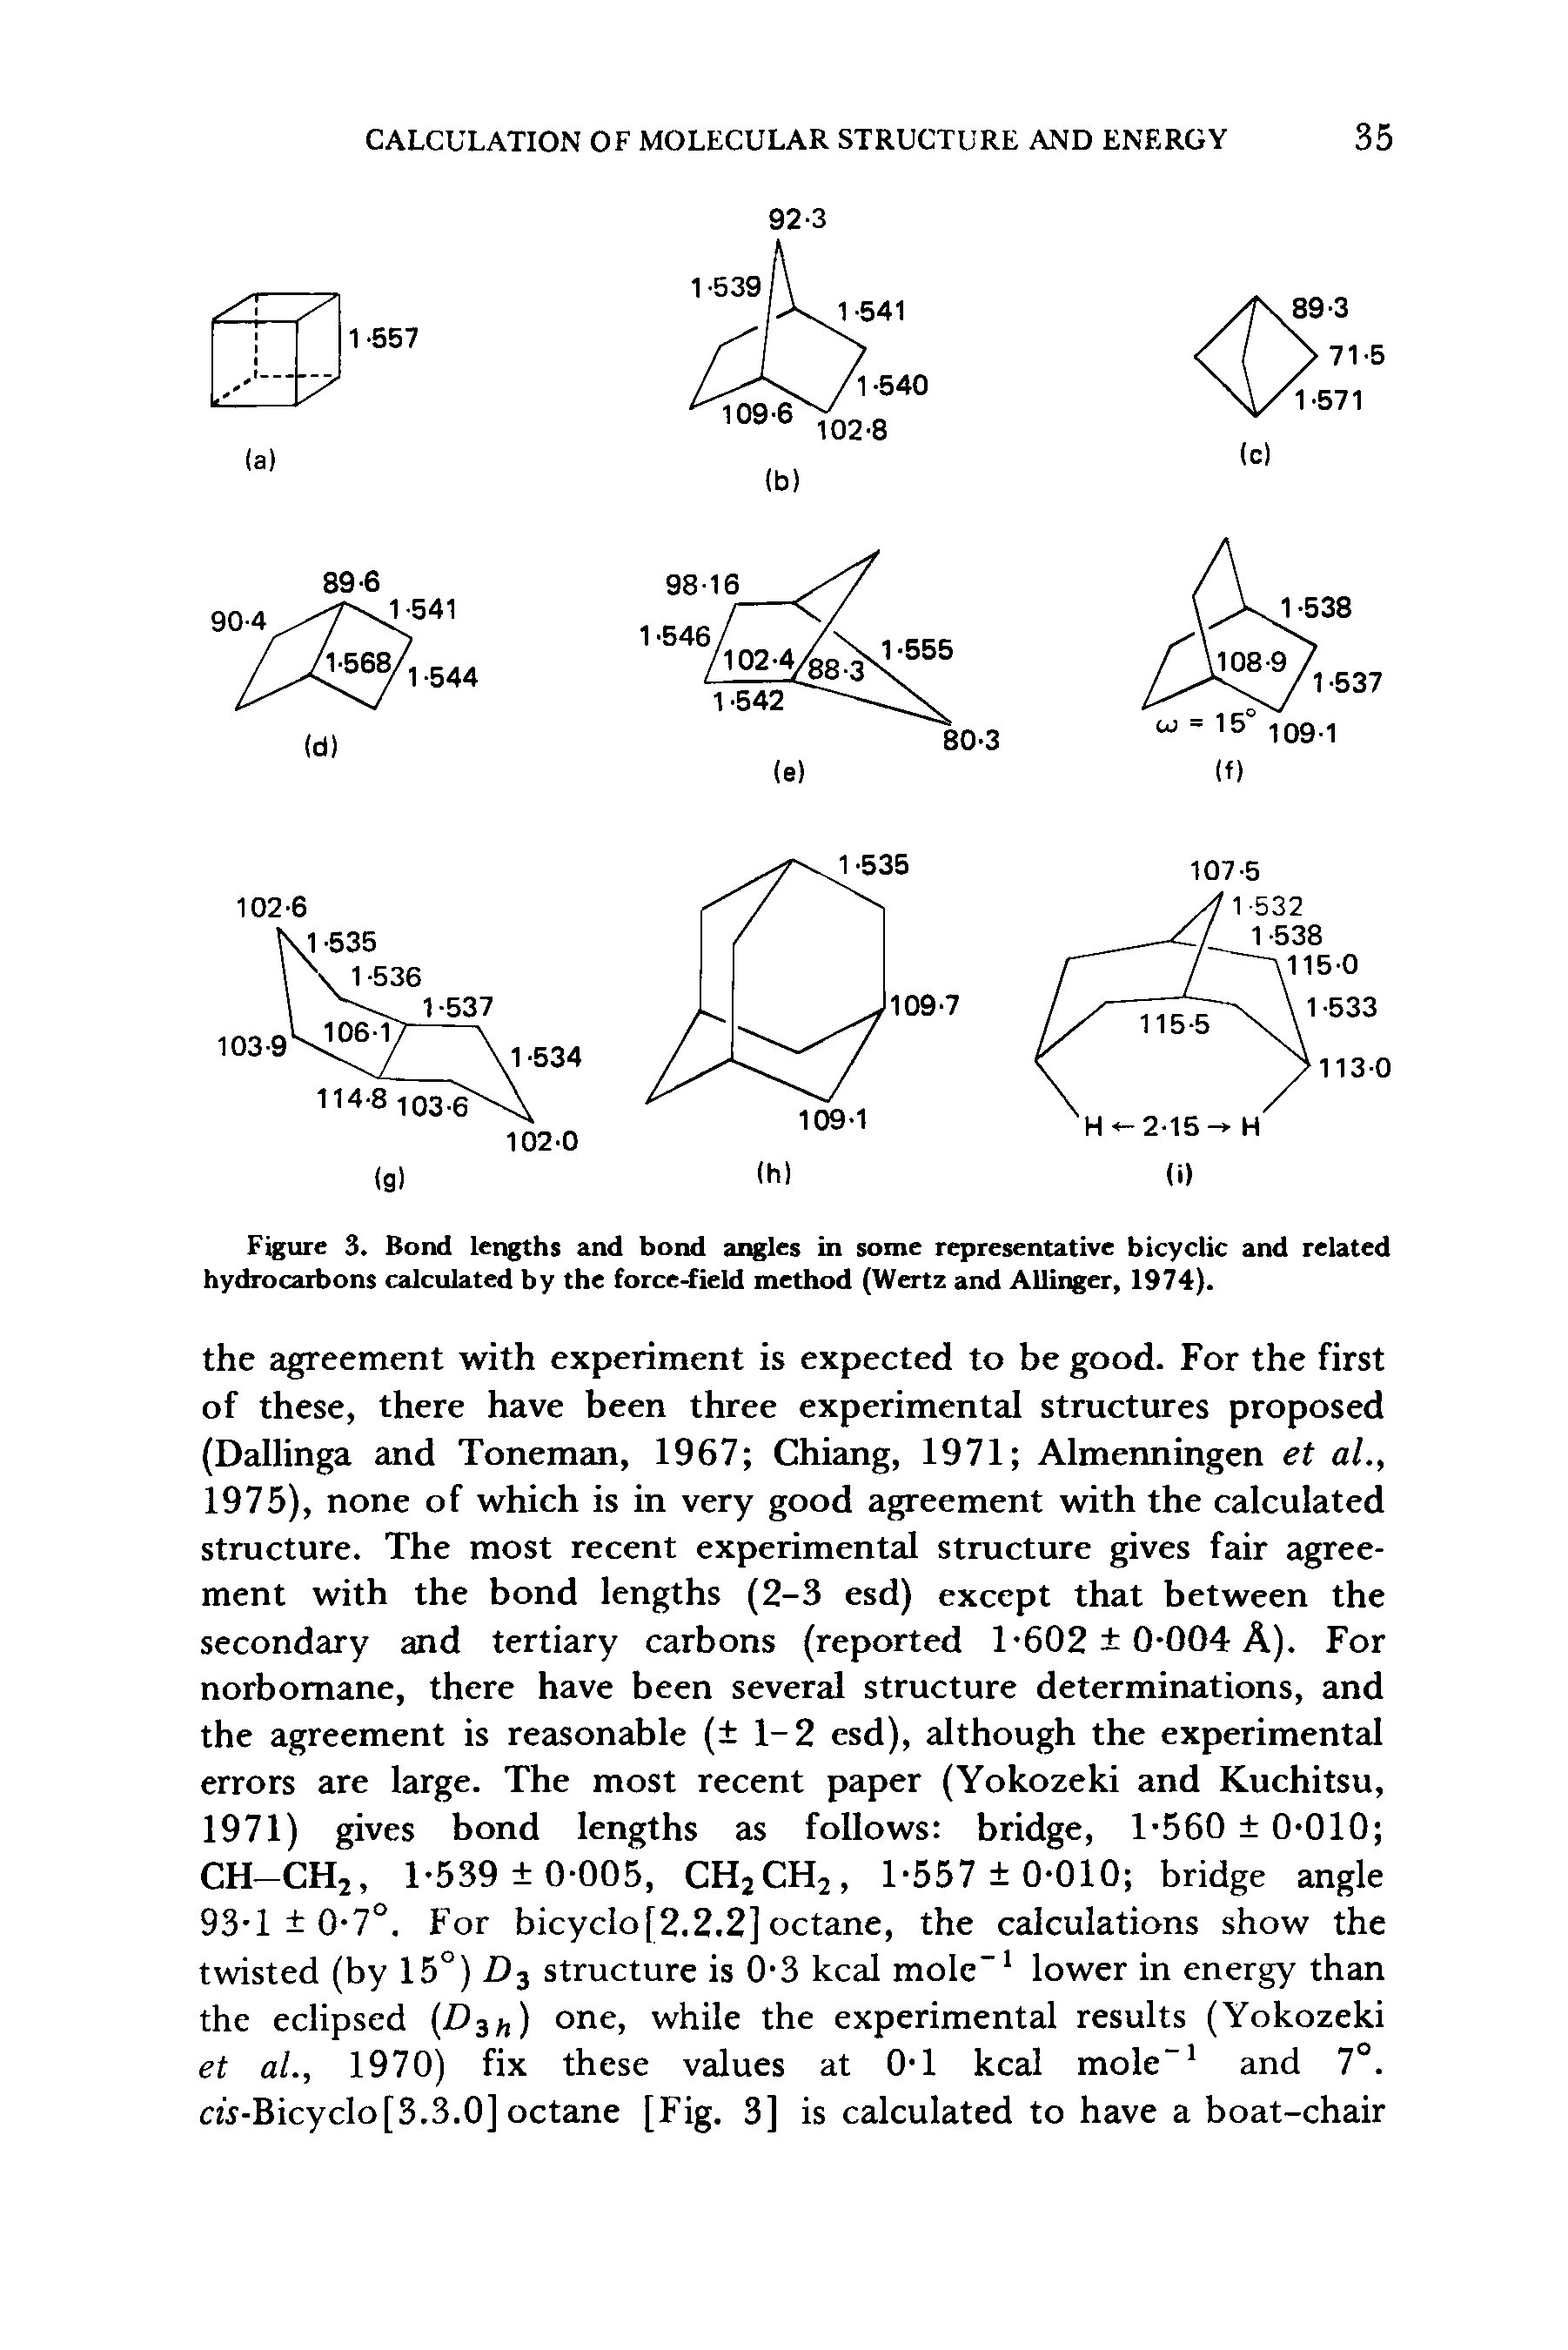 Figure 3. Bond lengths and bond angles in some representative bicyclic and related hydrocarbons calculated by the force-field method (Wertz and Allinger, 1974).